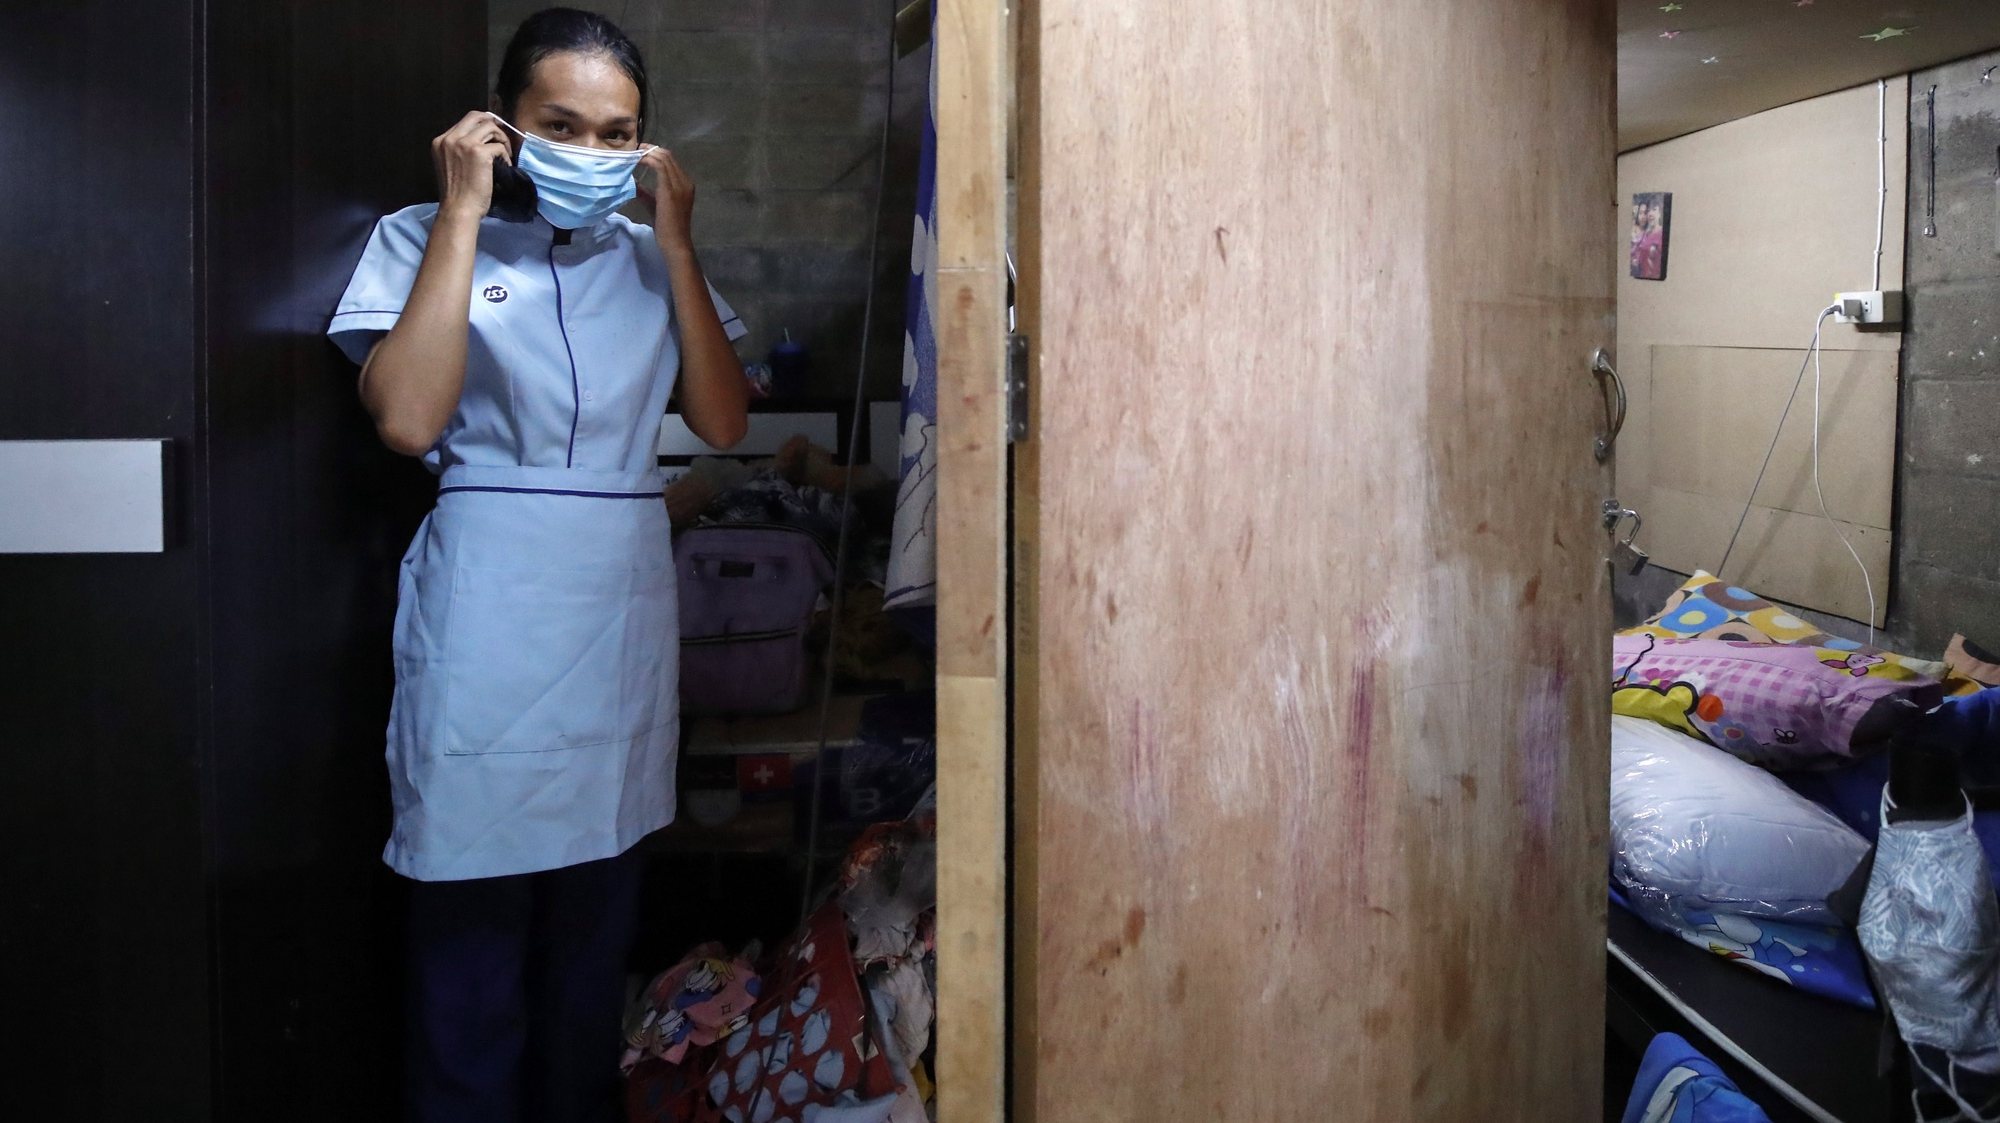 epa08495230 Wannisa Manatham puts on her protective mask at her home before leaving for work in Bangkok, Thailand, 23 May 2020 (issued 19 June 2020). In a neighborhood affected by crime and drug addiction, Wannisa faces economic drowning by Covid-19. Along with her uncle, Wannisa, who works as a cleaner in a hospital earning about 12,000 baht a month (about 376 dollars), is the only adult out of four in her family who have not lost their job to the pandemic. (about 376 US dollars). The pandemic has killed more men but it is women who are the most vulnerable to its socio-economic effects. Women often have to care for children, elderly and sick during lockdown. Many have not only lost their jobs but have been exposed to domestic violence as well as a widening in the gap of systematic inequality, especially in the poorest countries. UN Women warns in a report on the effects of Covid-19 that women do an average of 4.1 hours a day unpaid work such as housework or caring for dependents, three times as much as men. All the unpaid care carried out by women is equivalent to 2.35 percent of the global GDP or 1.35 trillion US dollars. In addition to occupying 70 percent of jobs in the health sector worldwide, women generally earn an average of 16 percent less than men, which rises to 35 percent in some countries.  EPA/DIEGO AZUBEL To go with EFE story by Gaspar Ruiz ATTENTION: This Image is part of a PHOTO SET